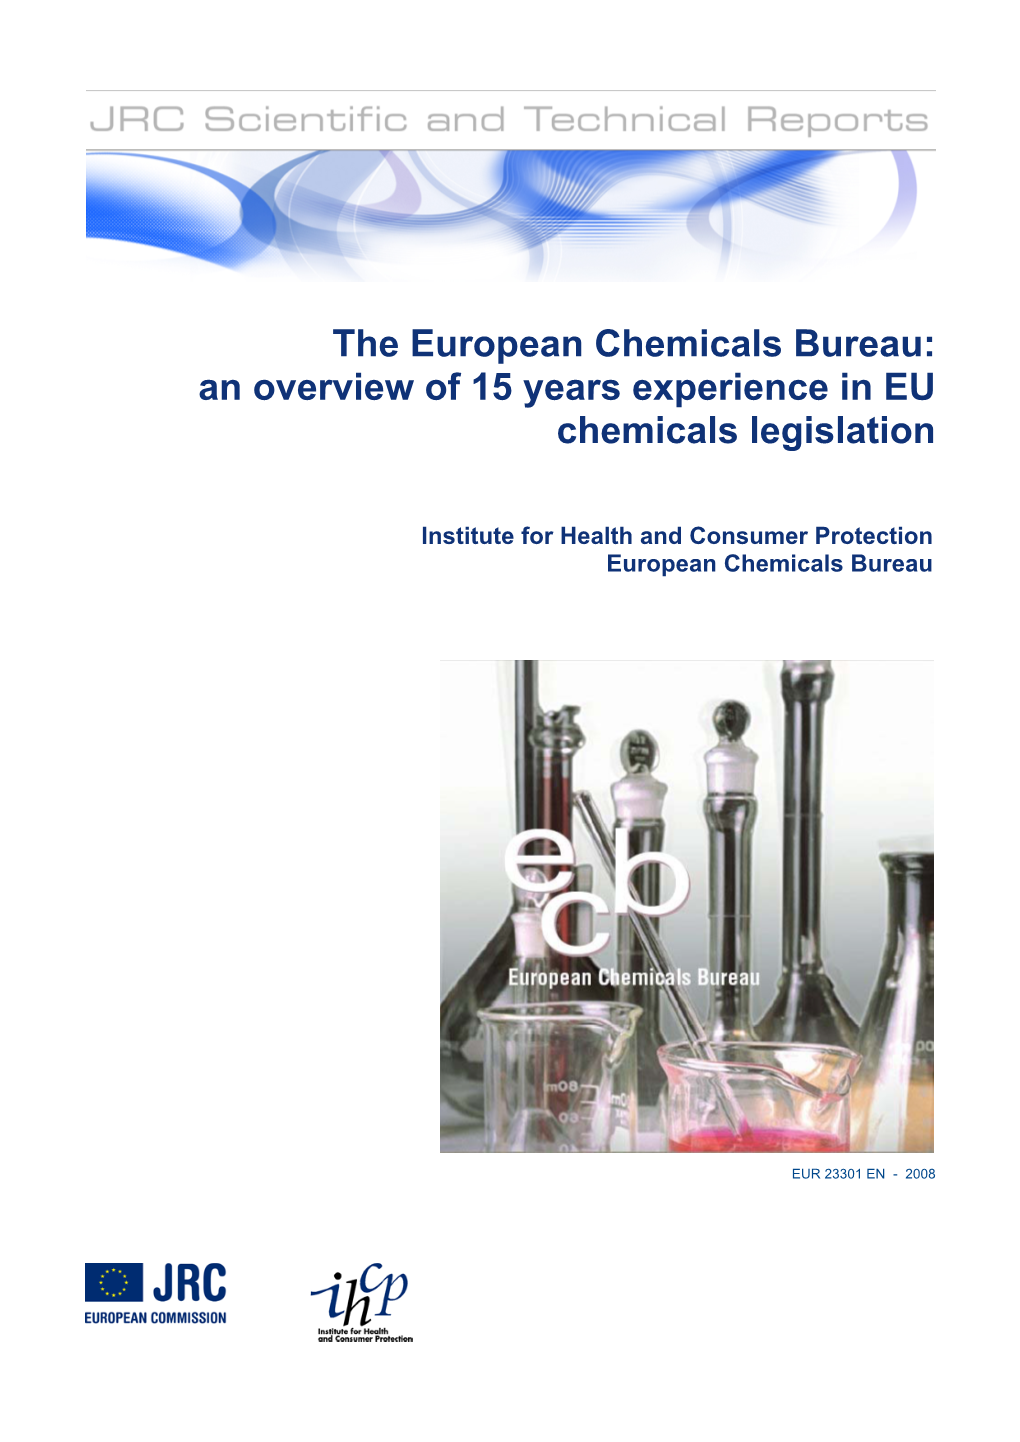 The European Chemicals Bureau: an Overview of 15 Years Experience in EU